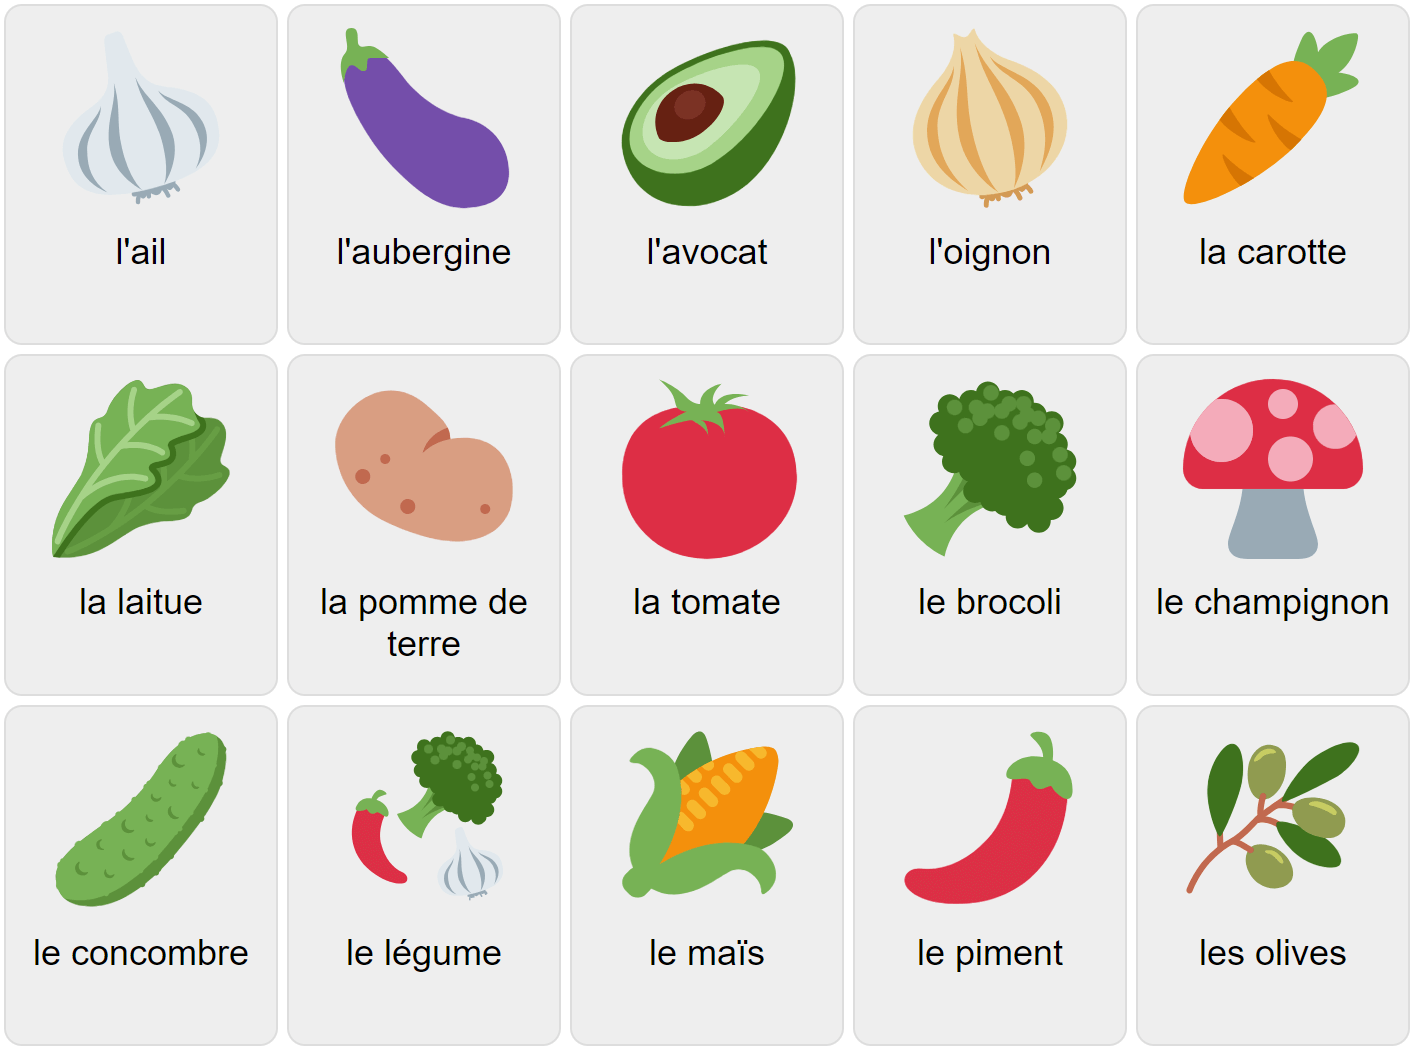 Vegetables in French